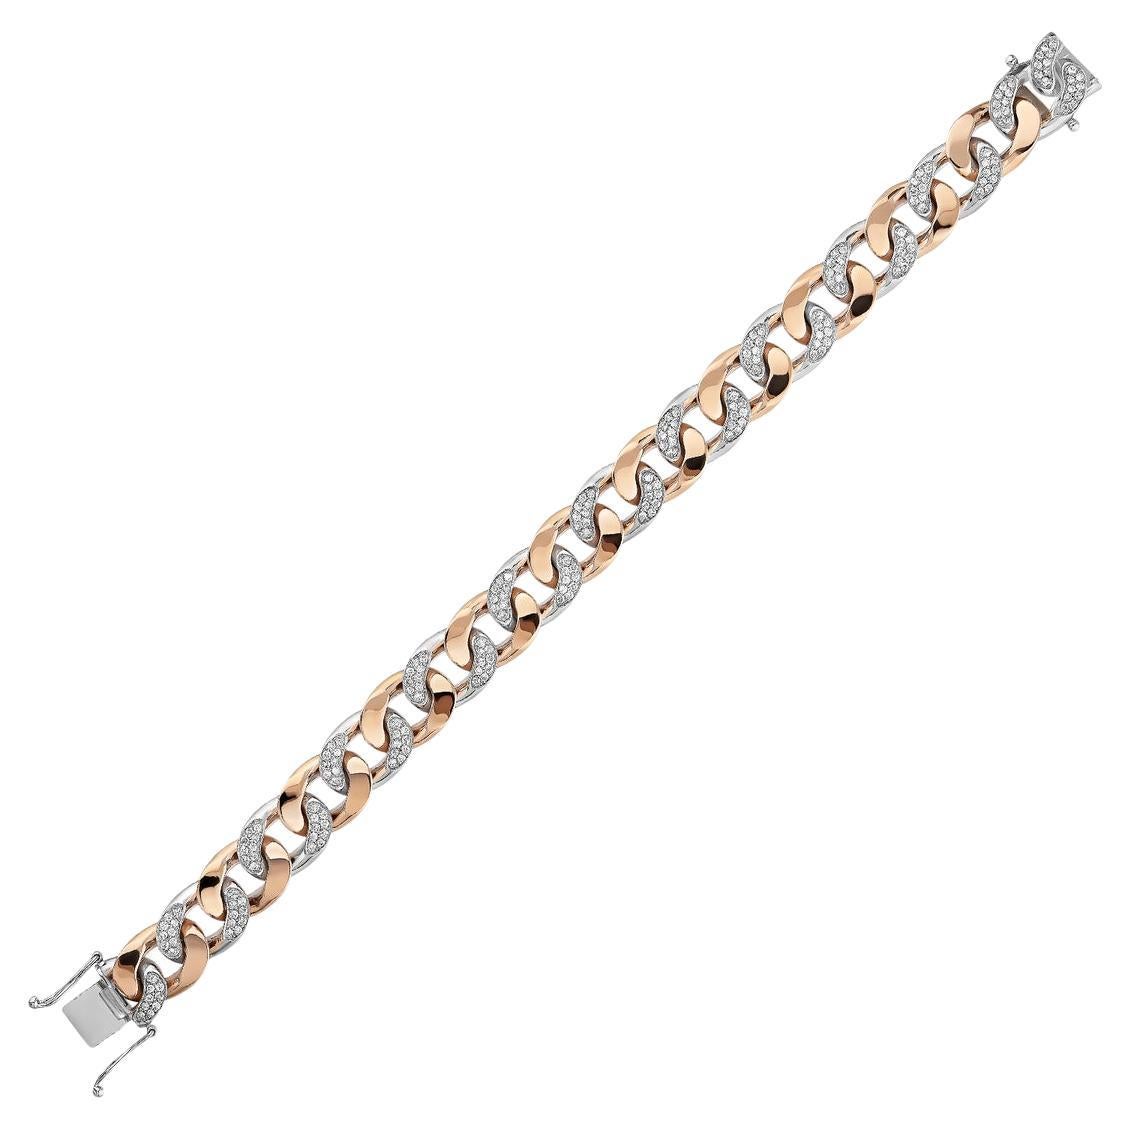 Cuban Diamond Bracelet in White and Rose 18K Gold, Handcrafted in New York For Sale